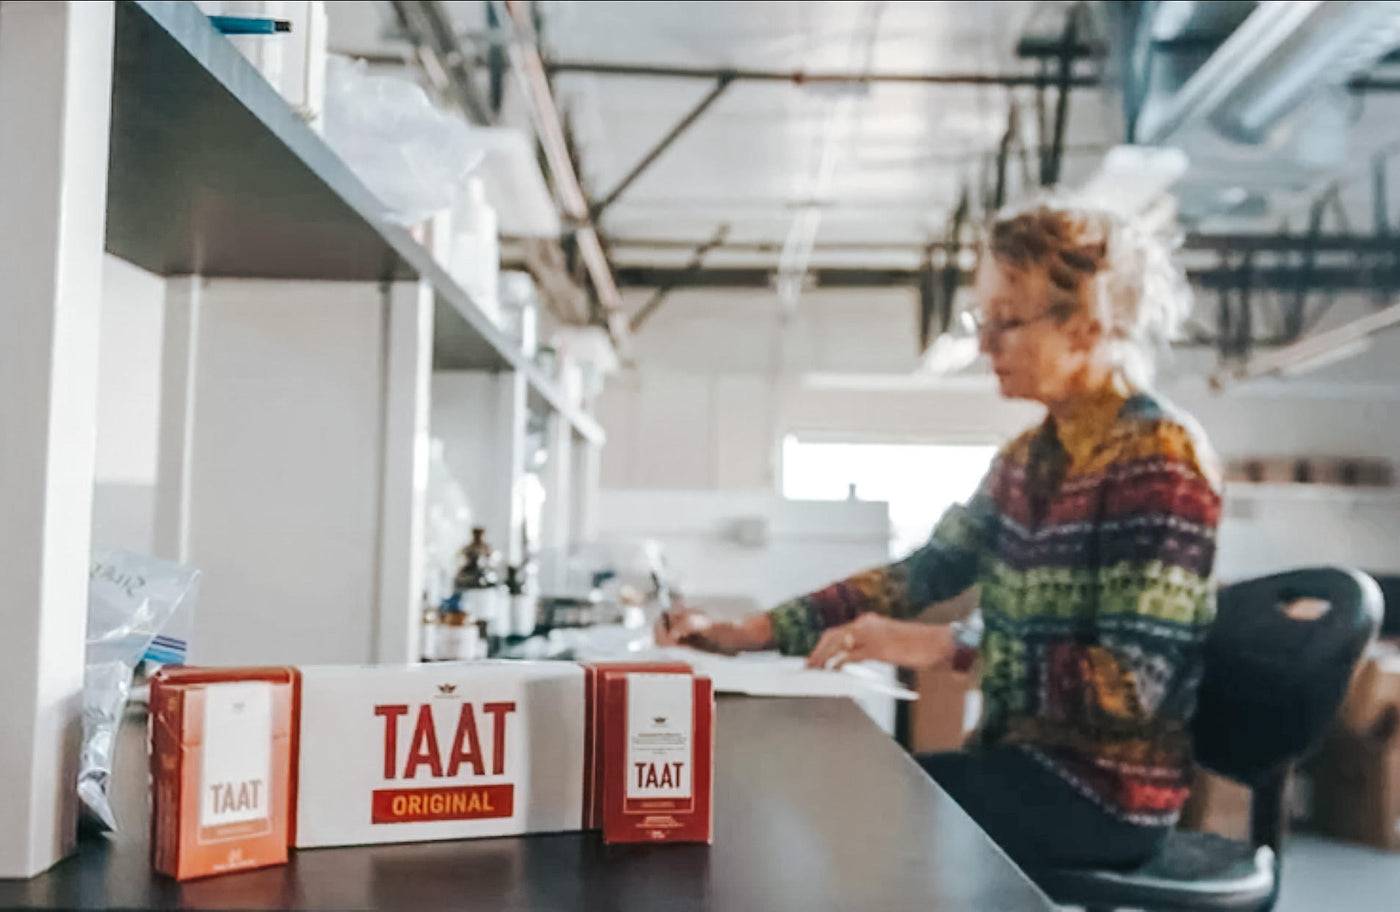 What is a TAAT?